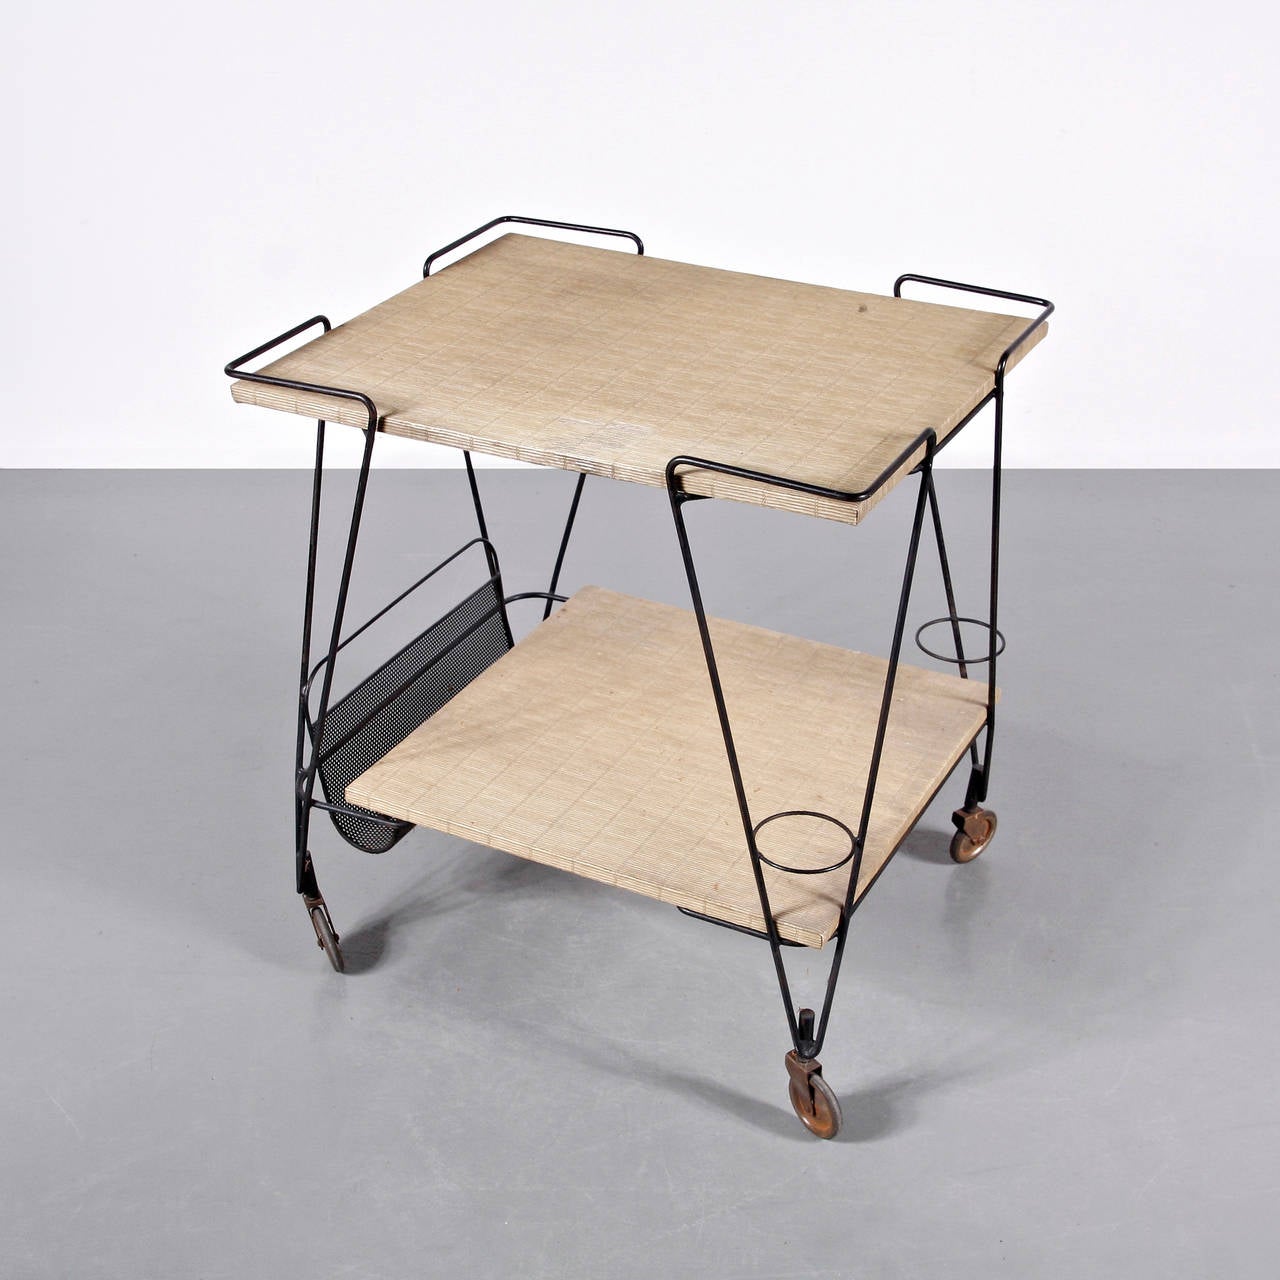 Tea trolley designed by Mathieu Matégot.
Manufactured by Ateliers Matégot (France), circa 1950.
Folded, perforated metal lacquered in black and brass detail.

In good original condition, with minor wear consistent with age and use, preserving a